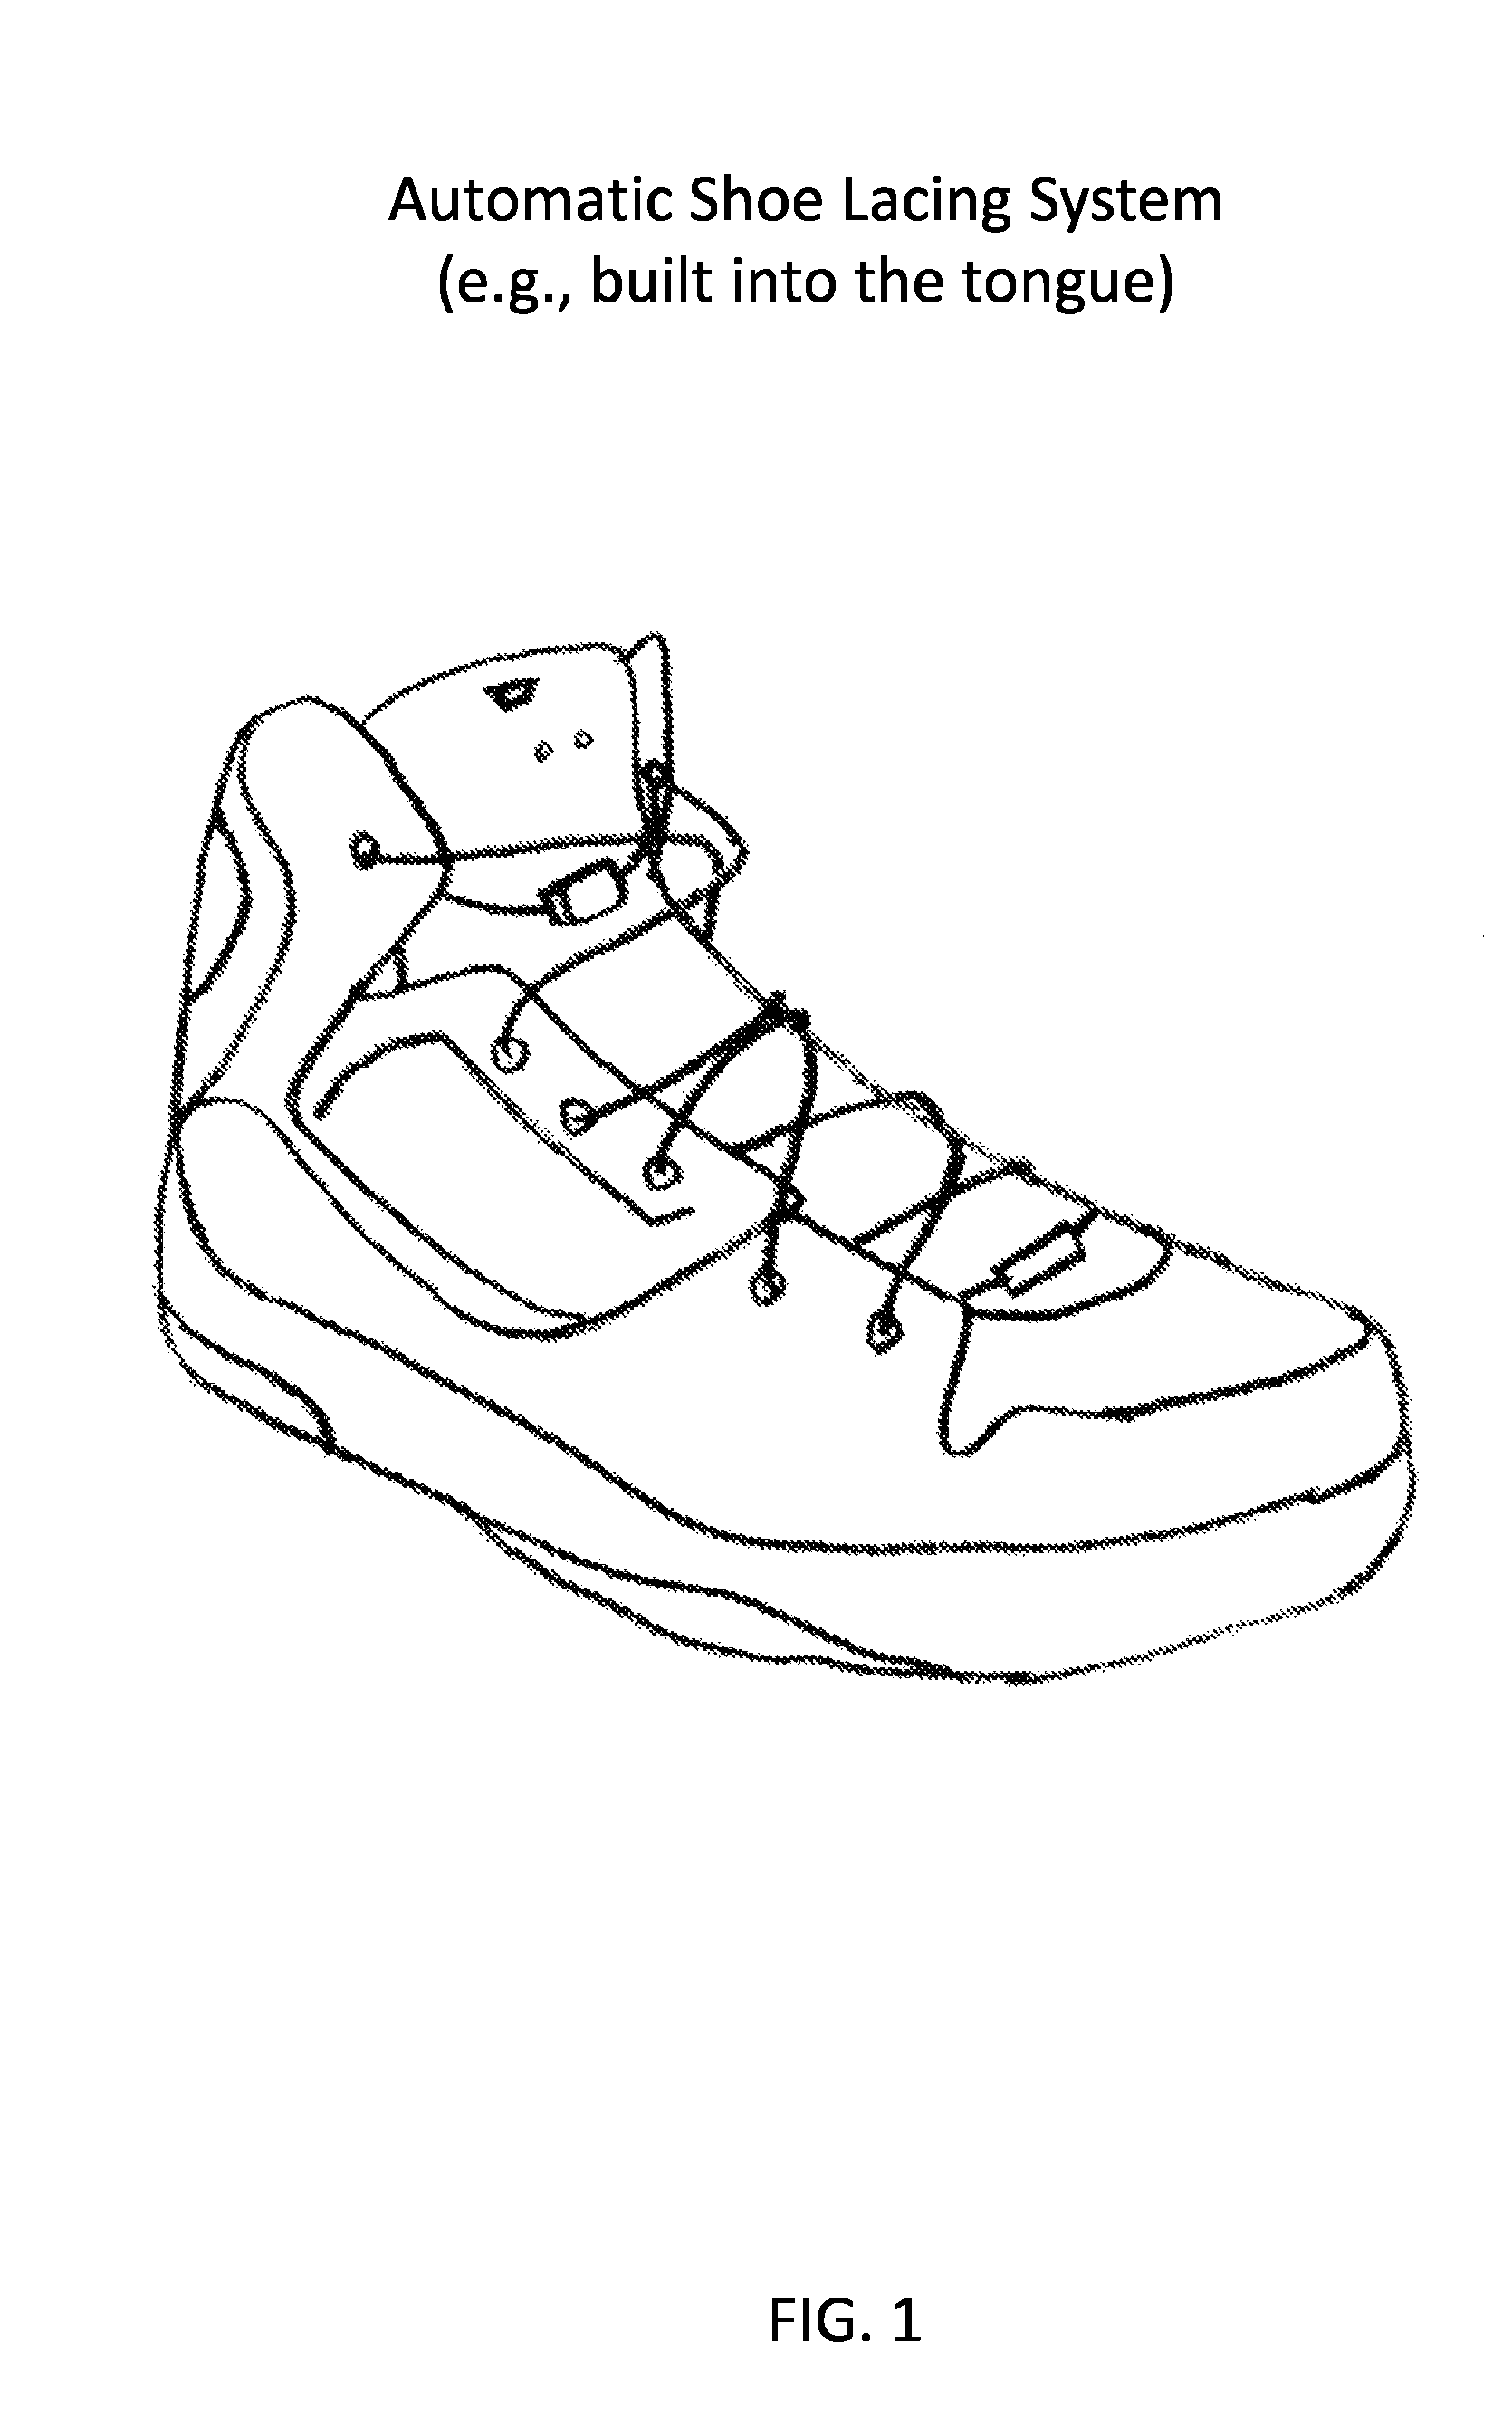 Device for automatically tightening and loosening shoe laces